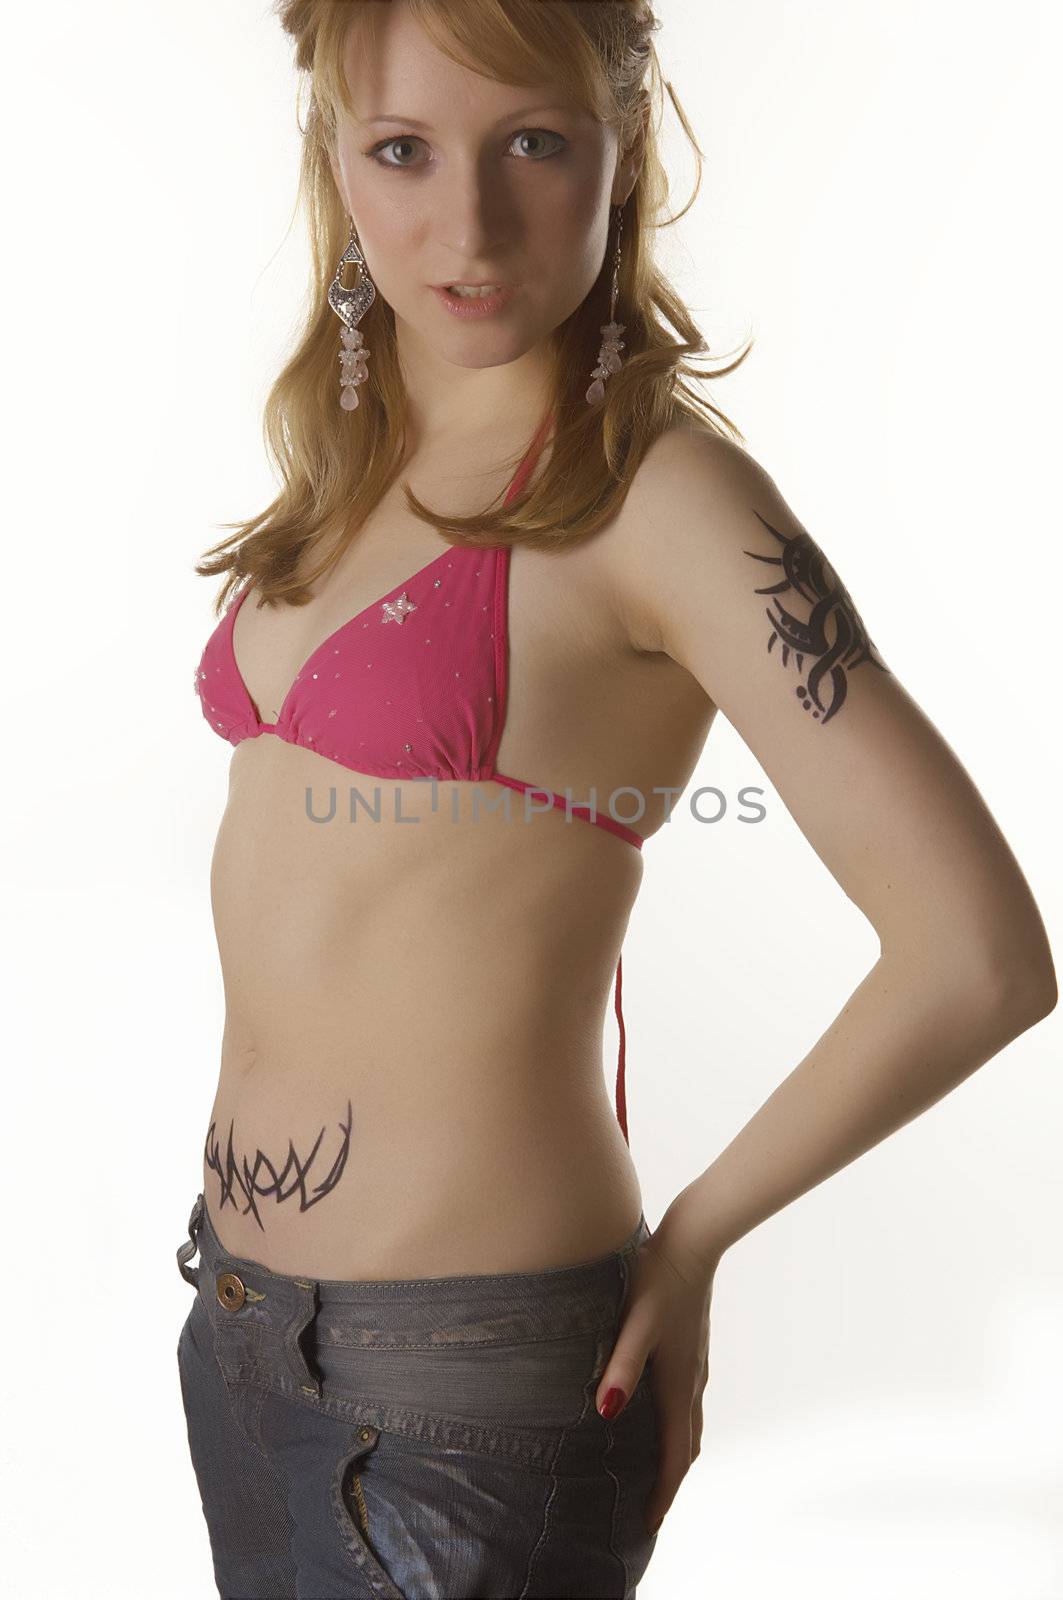 Blonde Girl with tattoo posing and smiling